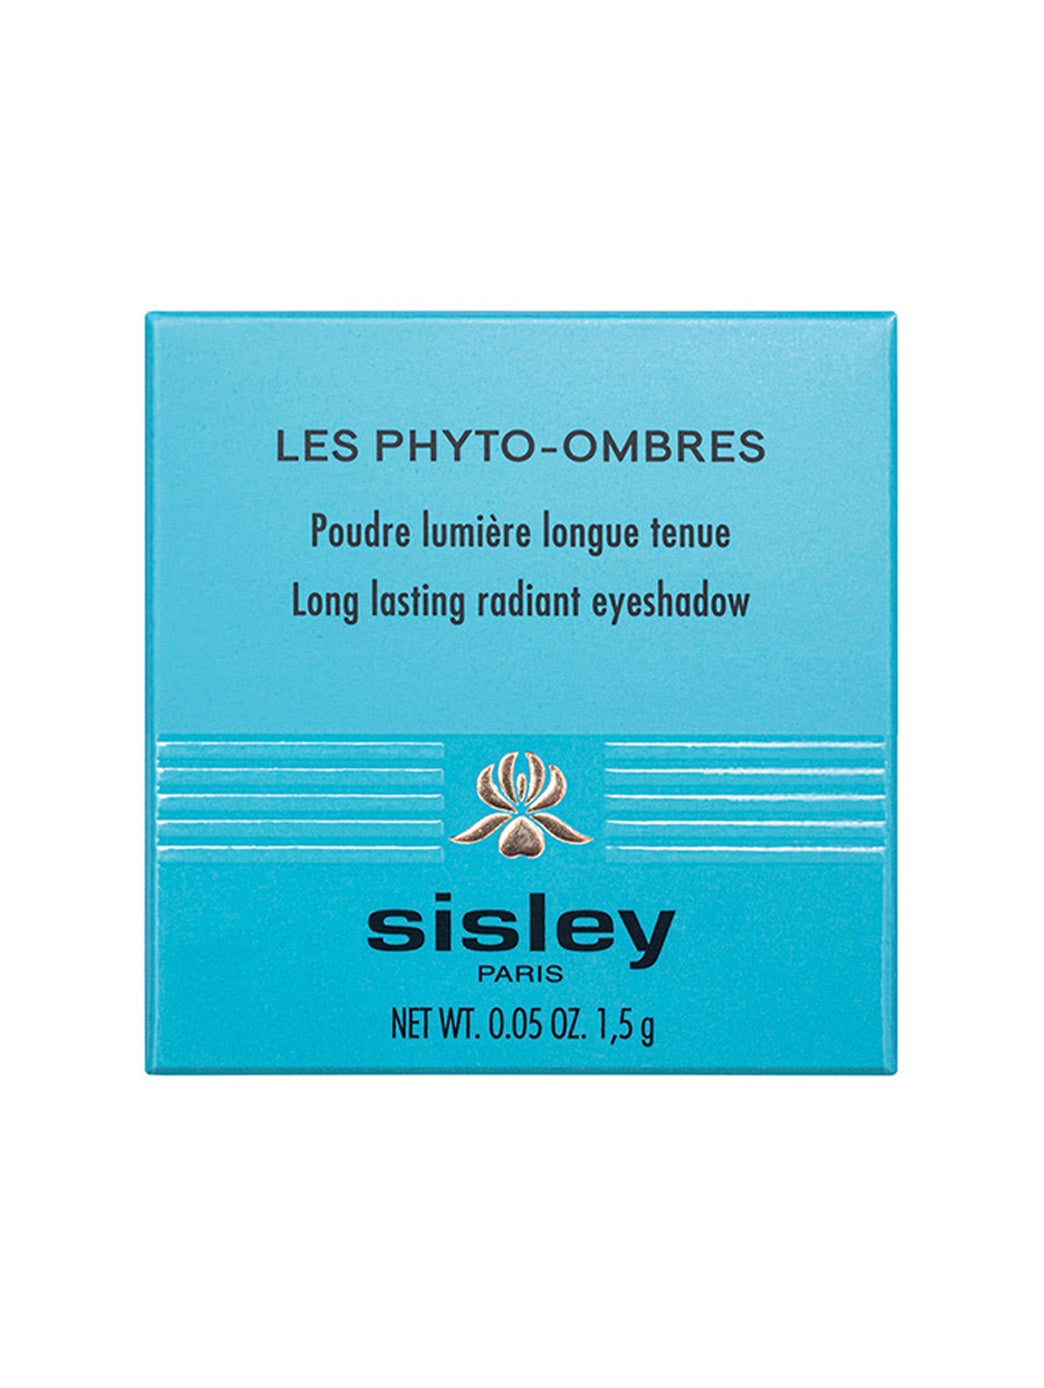 42472957378710 - Les Phyto-Ombres